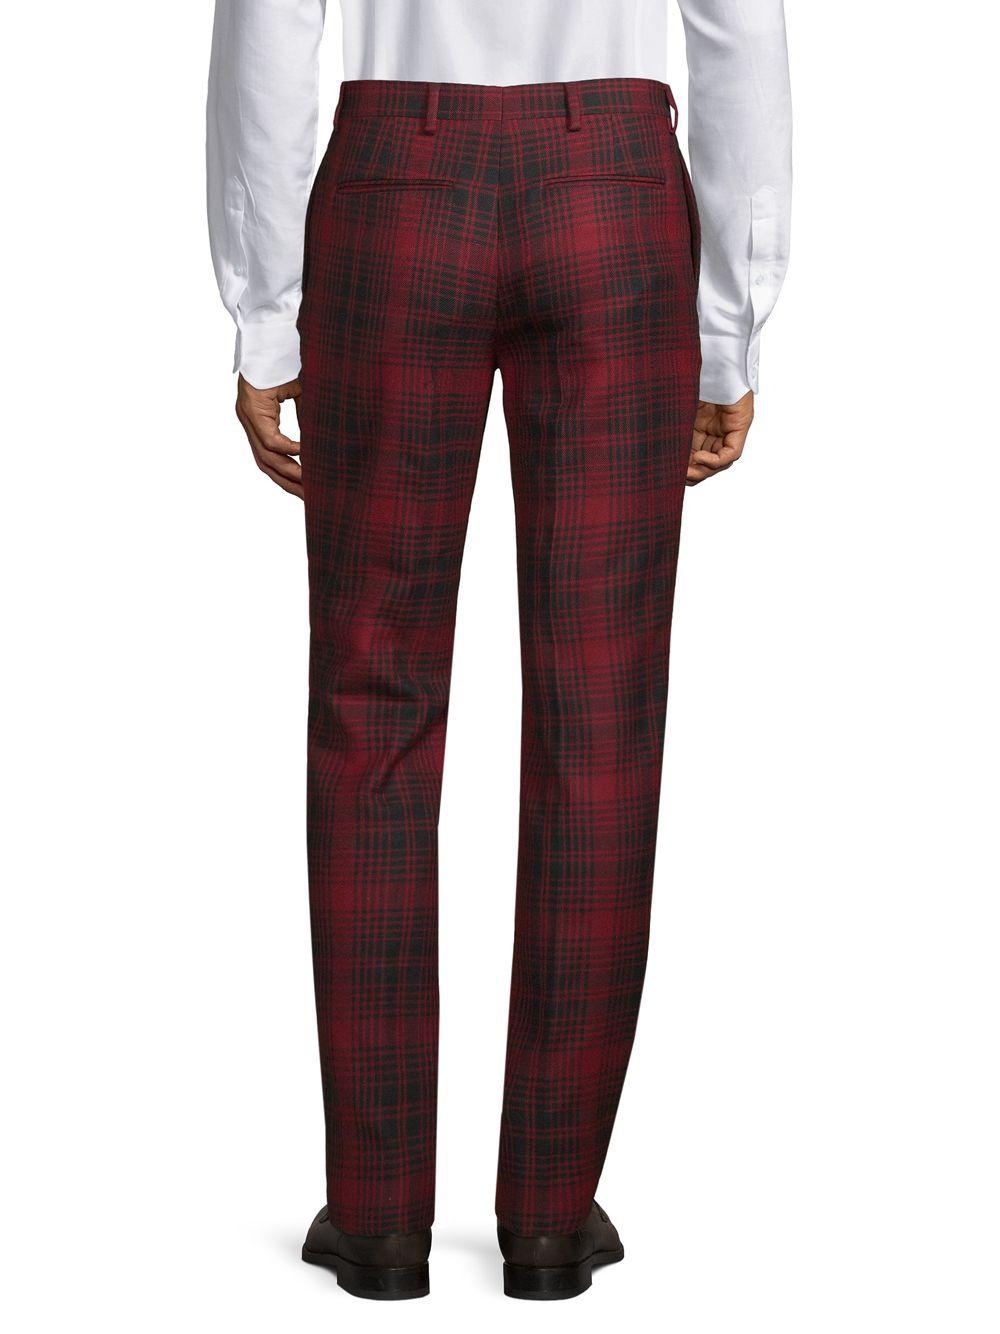 Valentino Plaid Wool Pants in Black Red Print (Red) for Men - Lyst